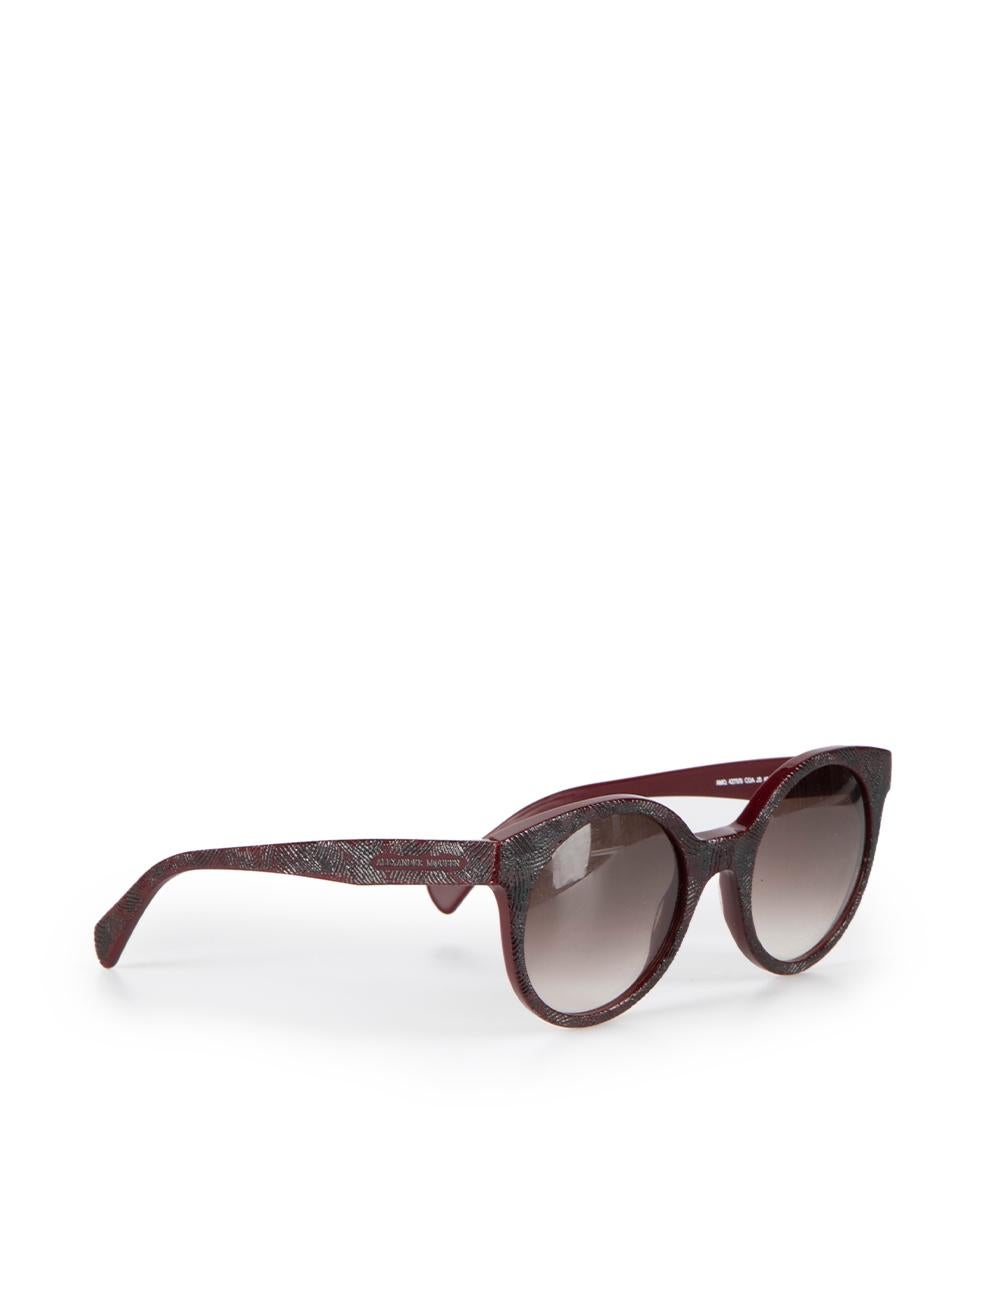 CONDITION is Very good. Hardly any visible wear to sunglasses is evident on this used Alexander McQueen designer resale item. This item comes with original case.



Details


Burgundy

Plastic

Round frame sunglasses

Textured

Brown tinted ombre